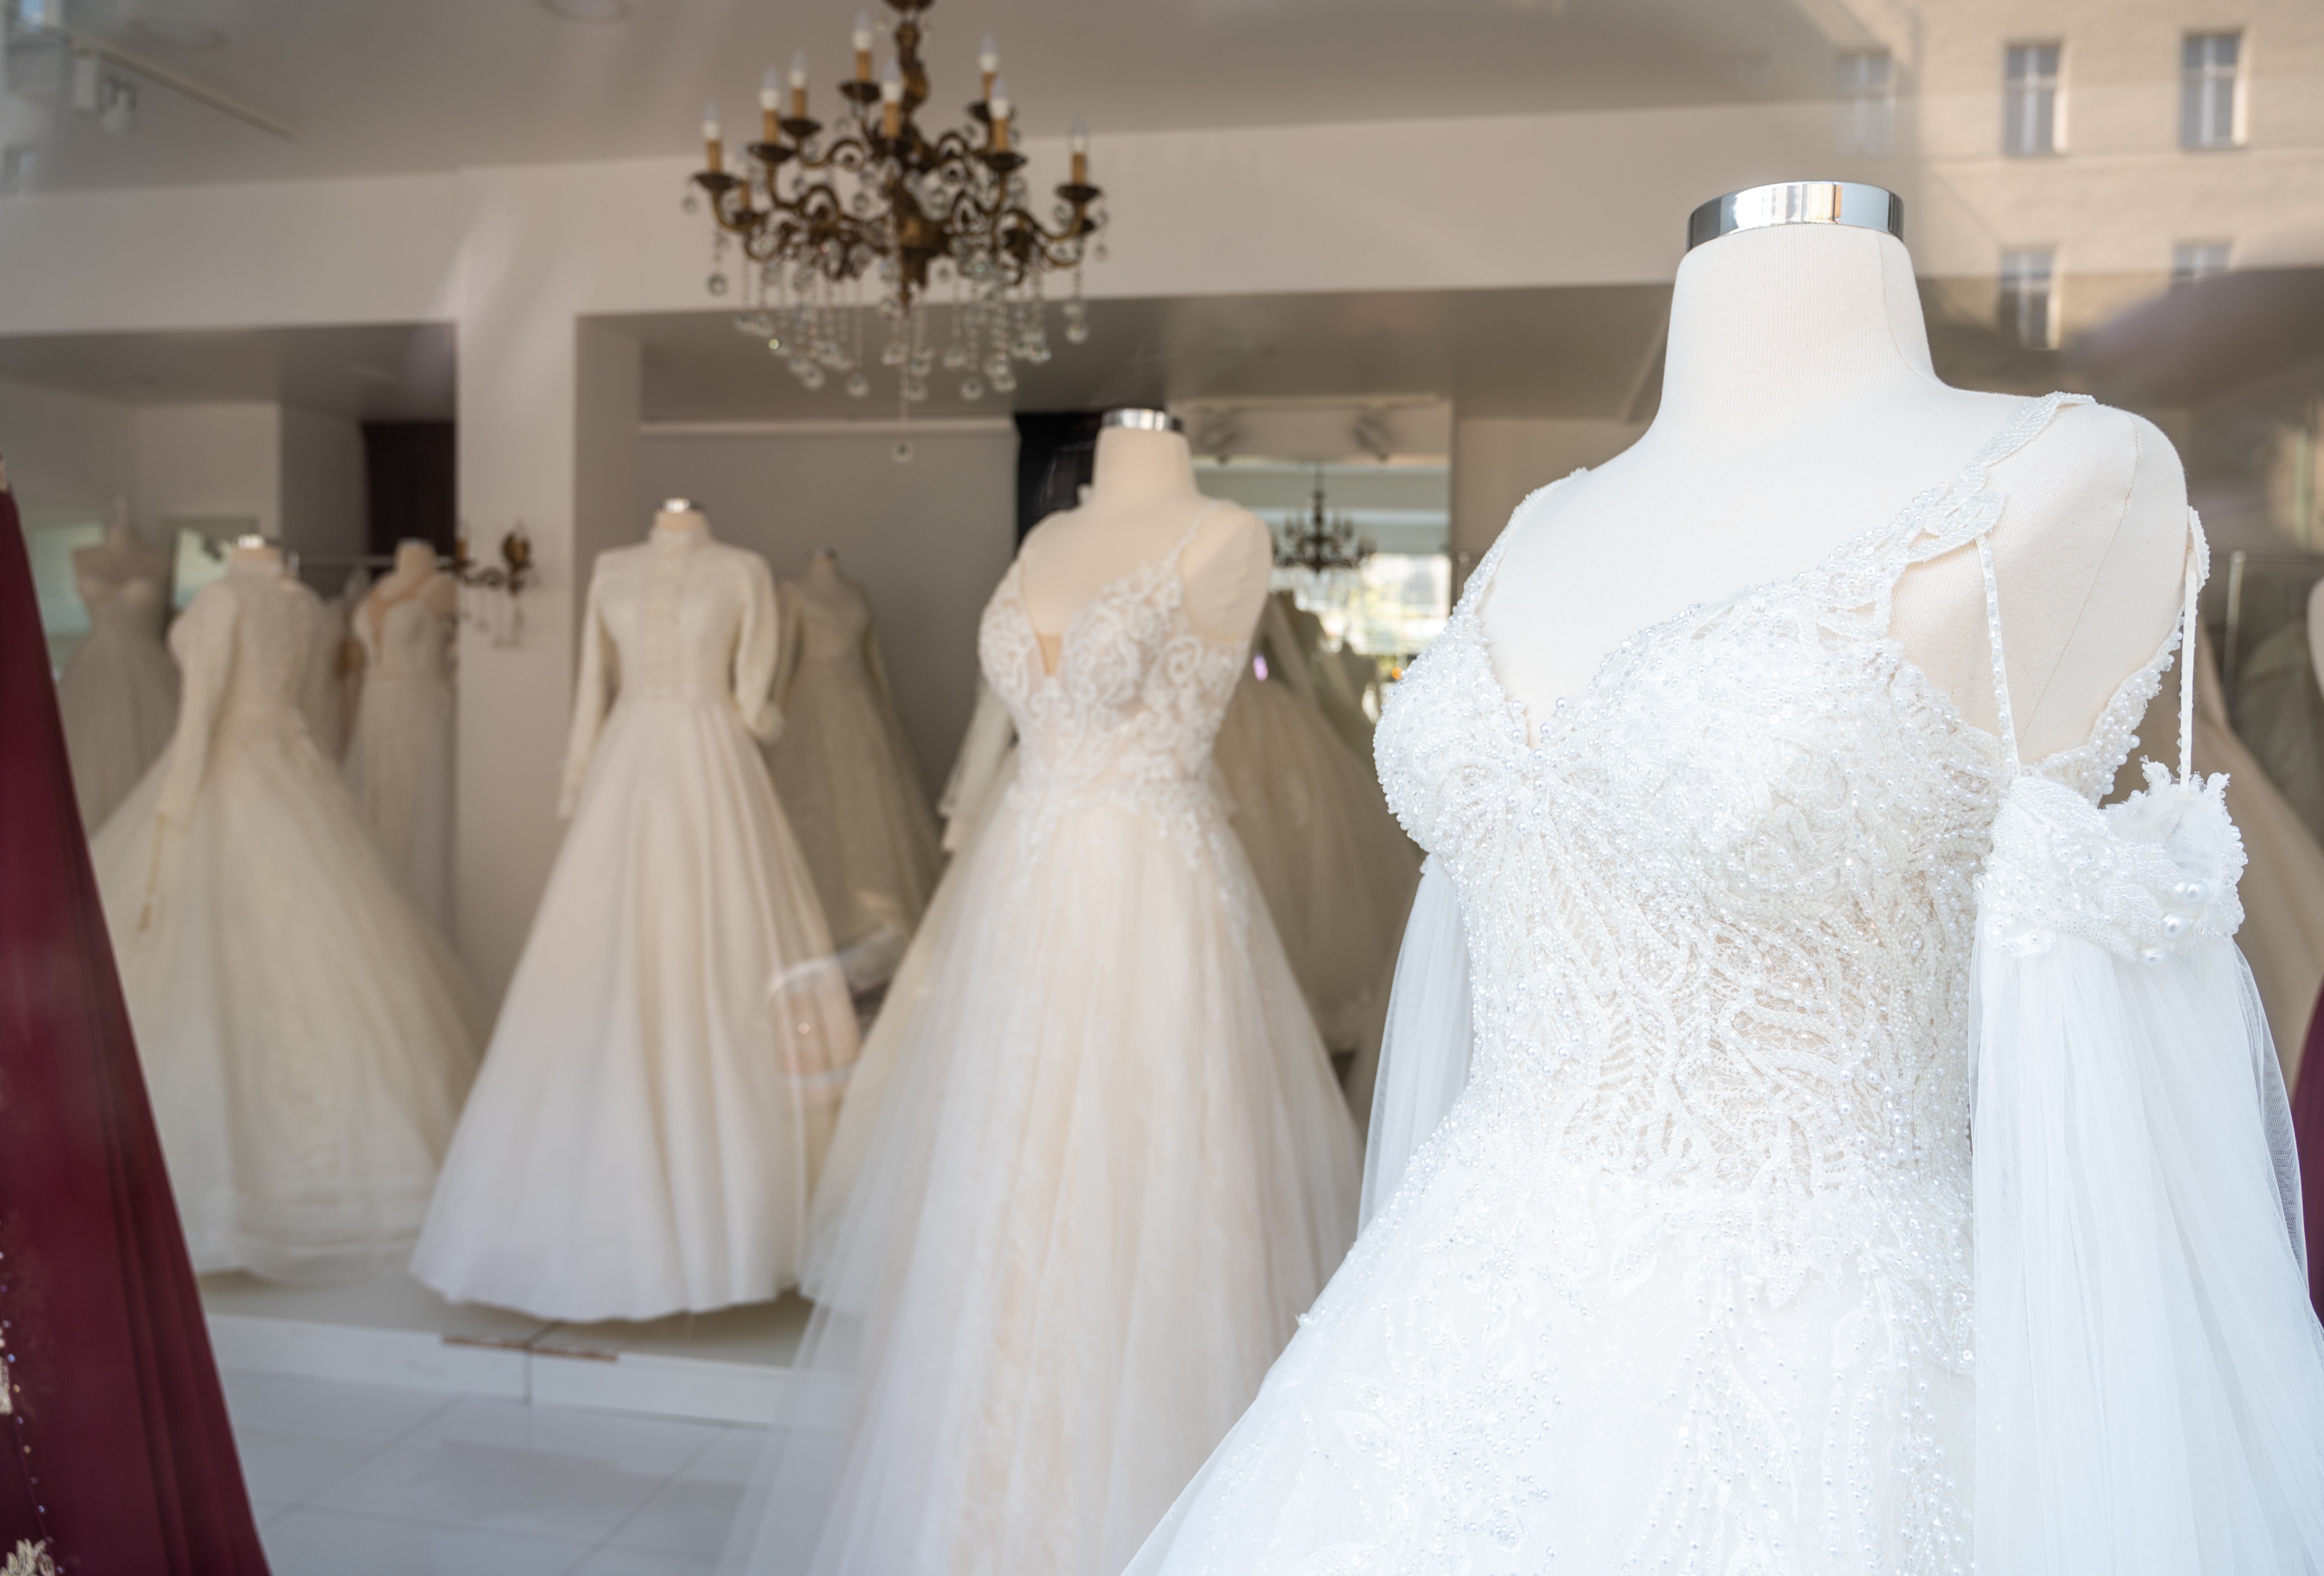 Display of wedding dresses in a shop | Source: Getty Images